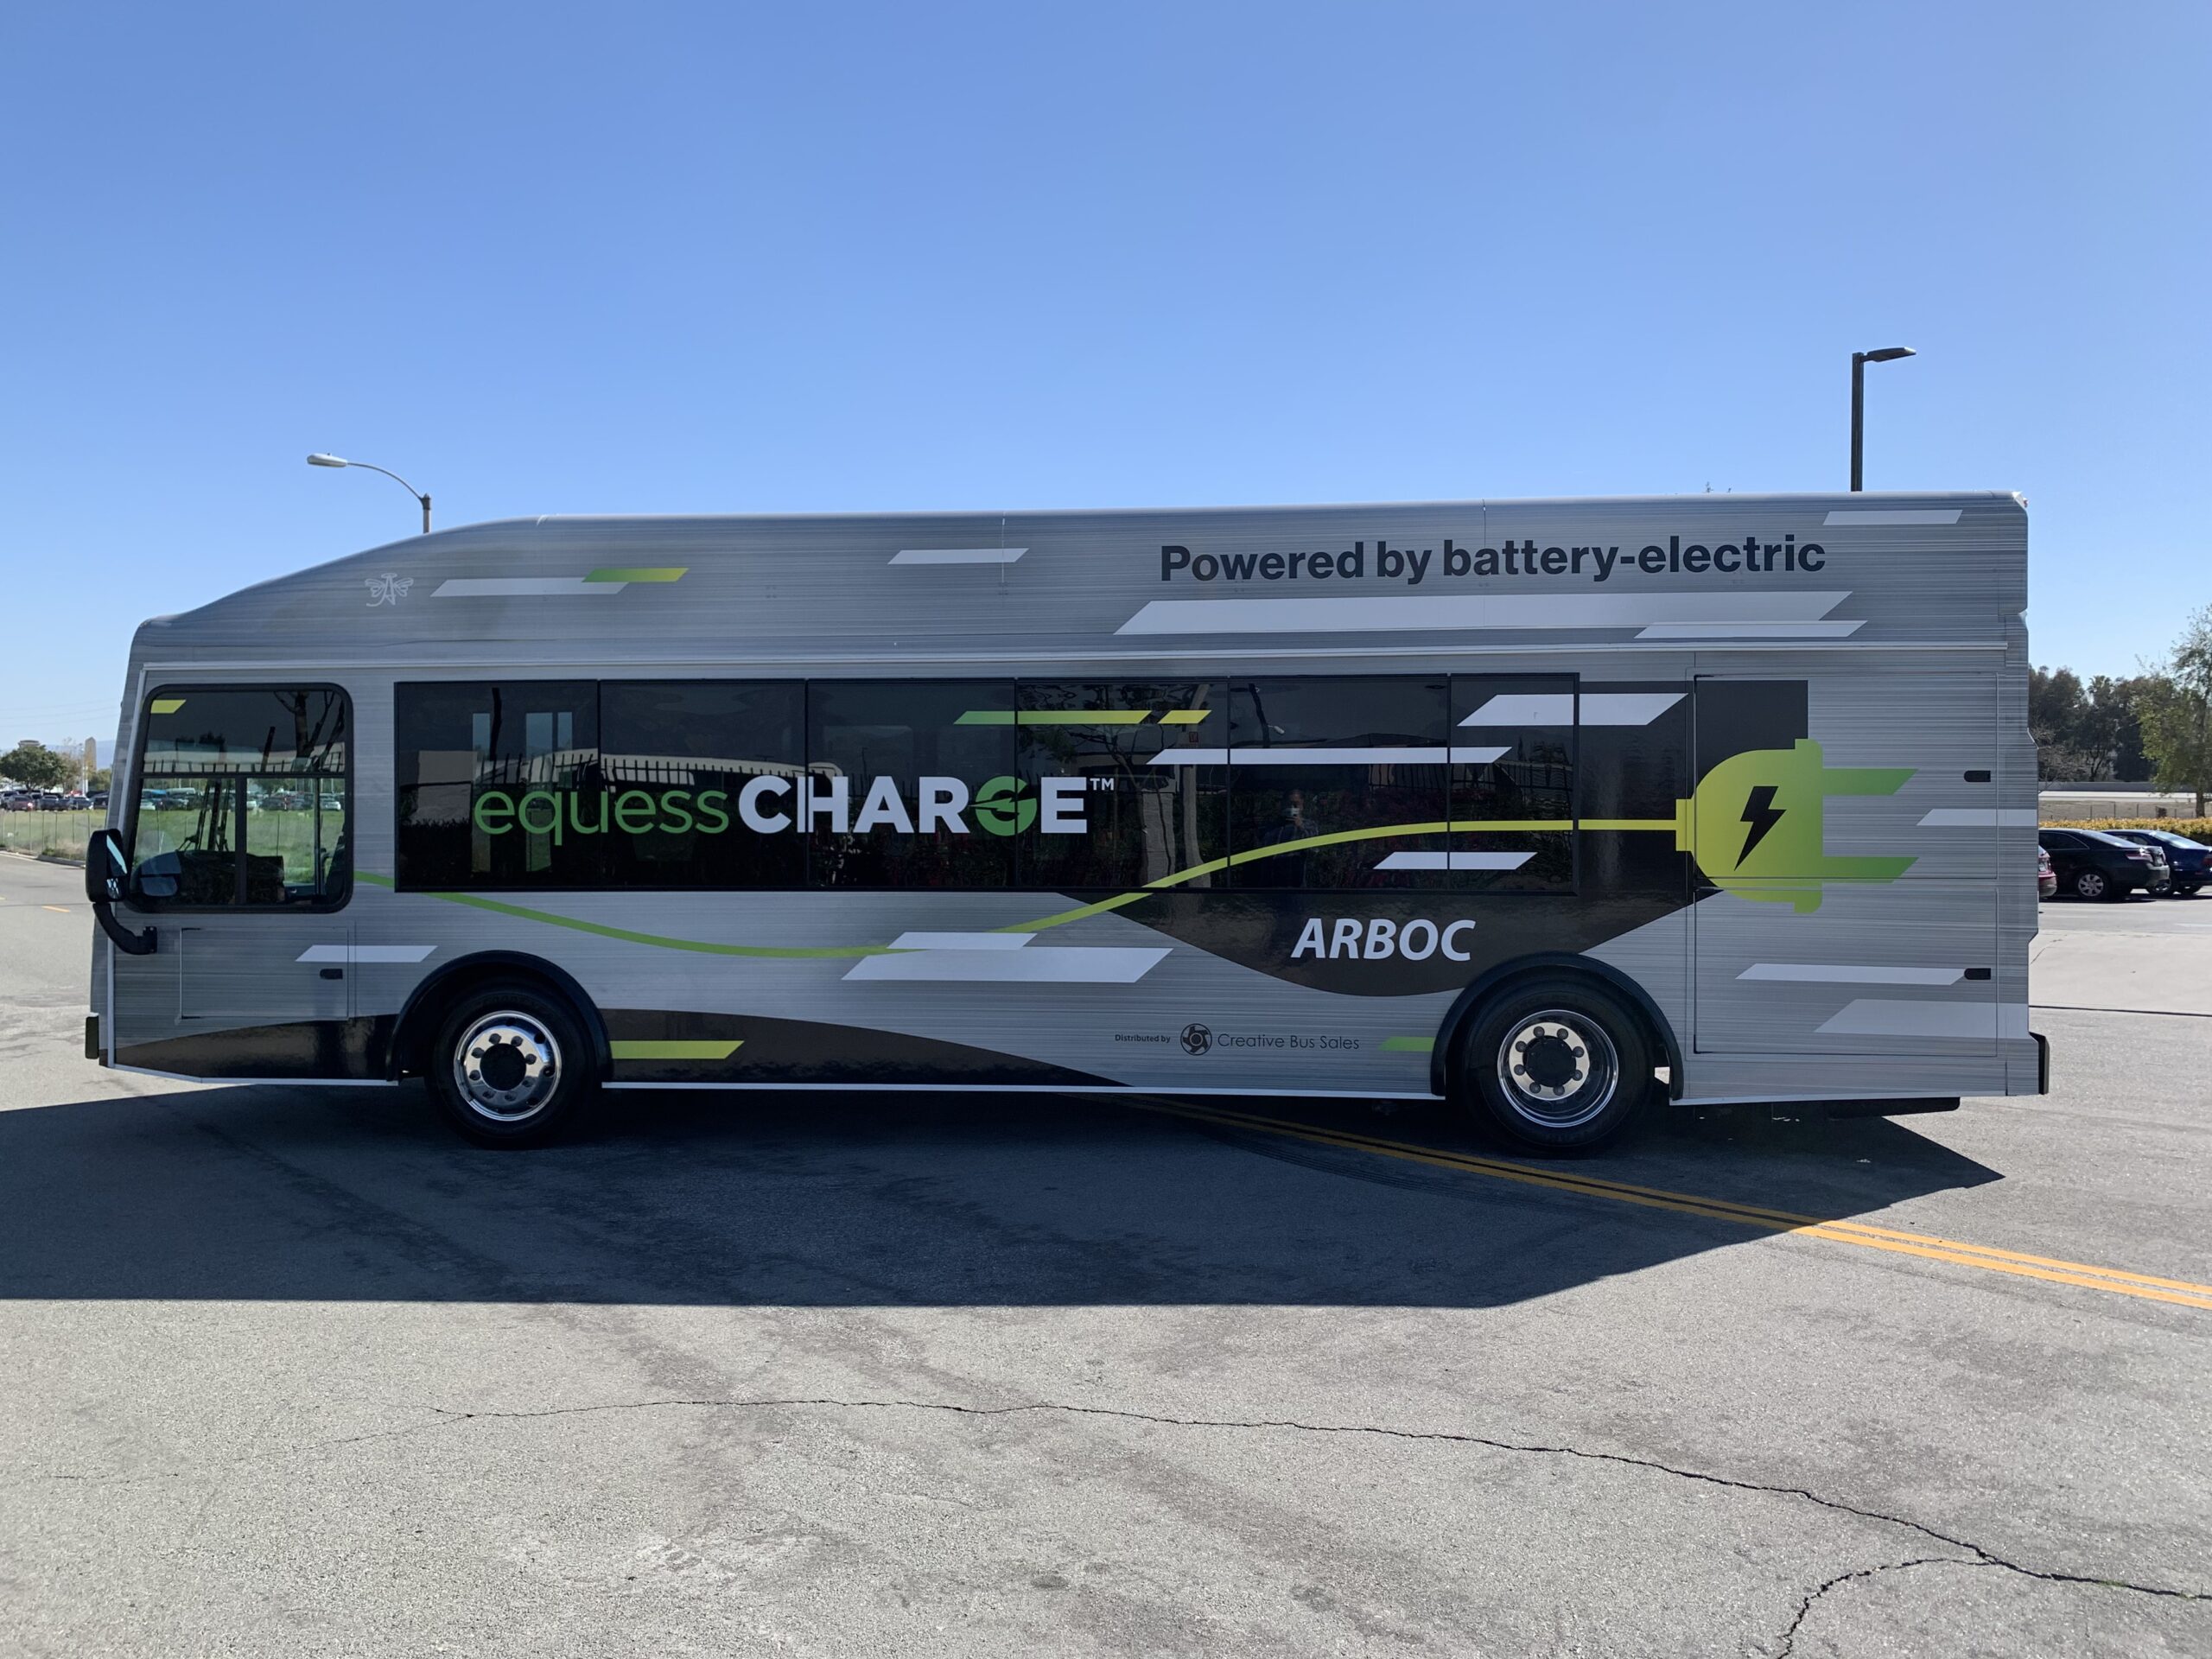 A 2021 ARBOC Equess CHARGE bus is parked in a parking lot.